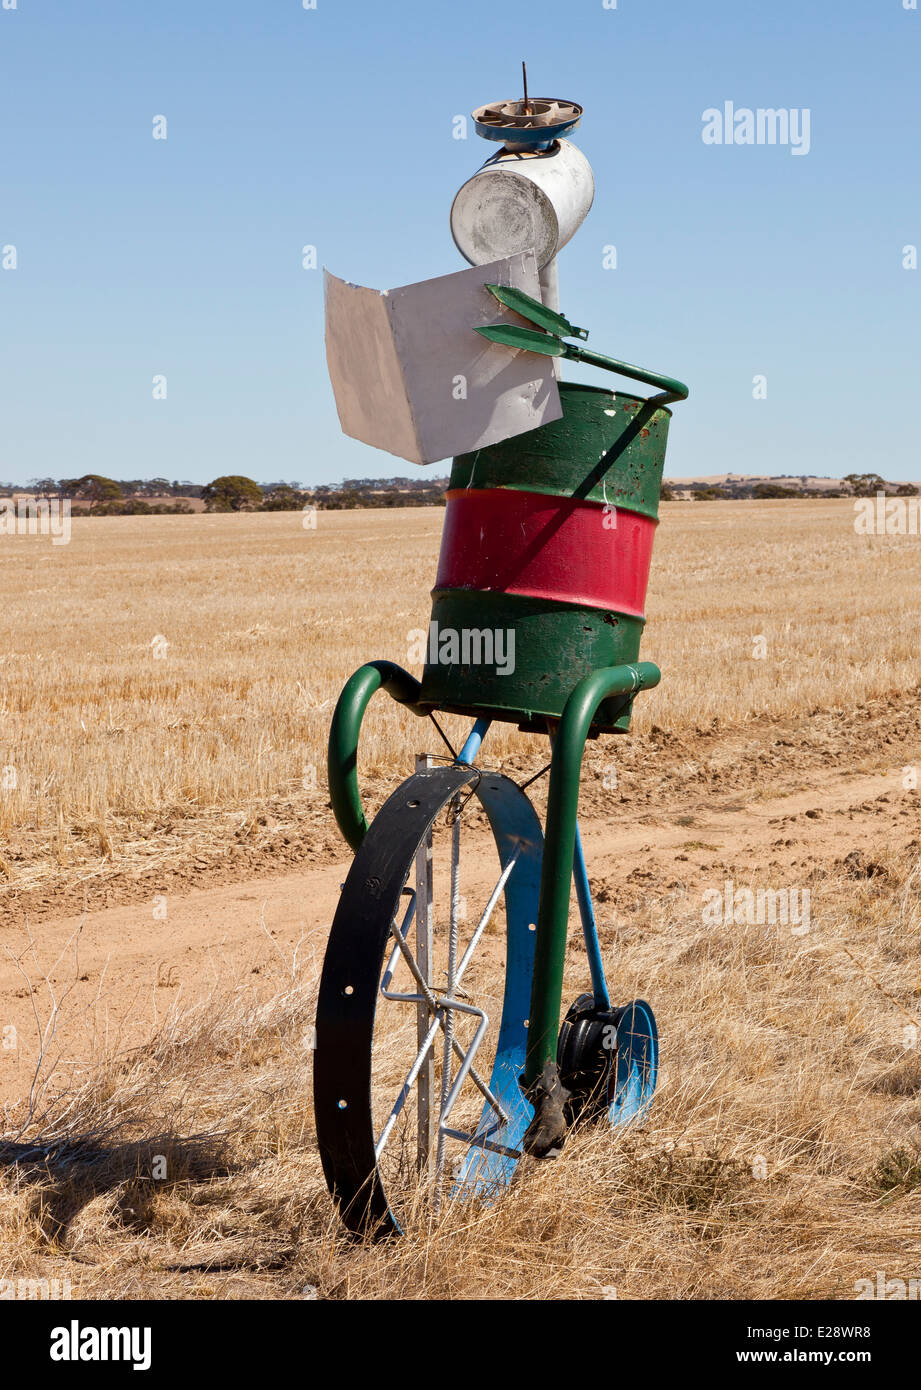 A Tin Horse on the Tin Horse Highway in Western Australia Stock Photo